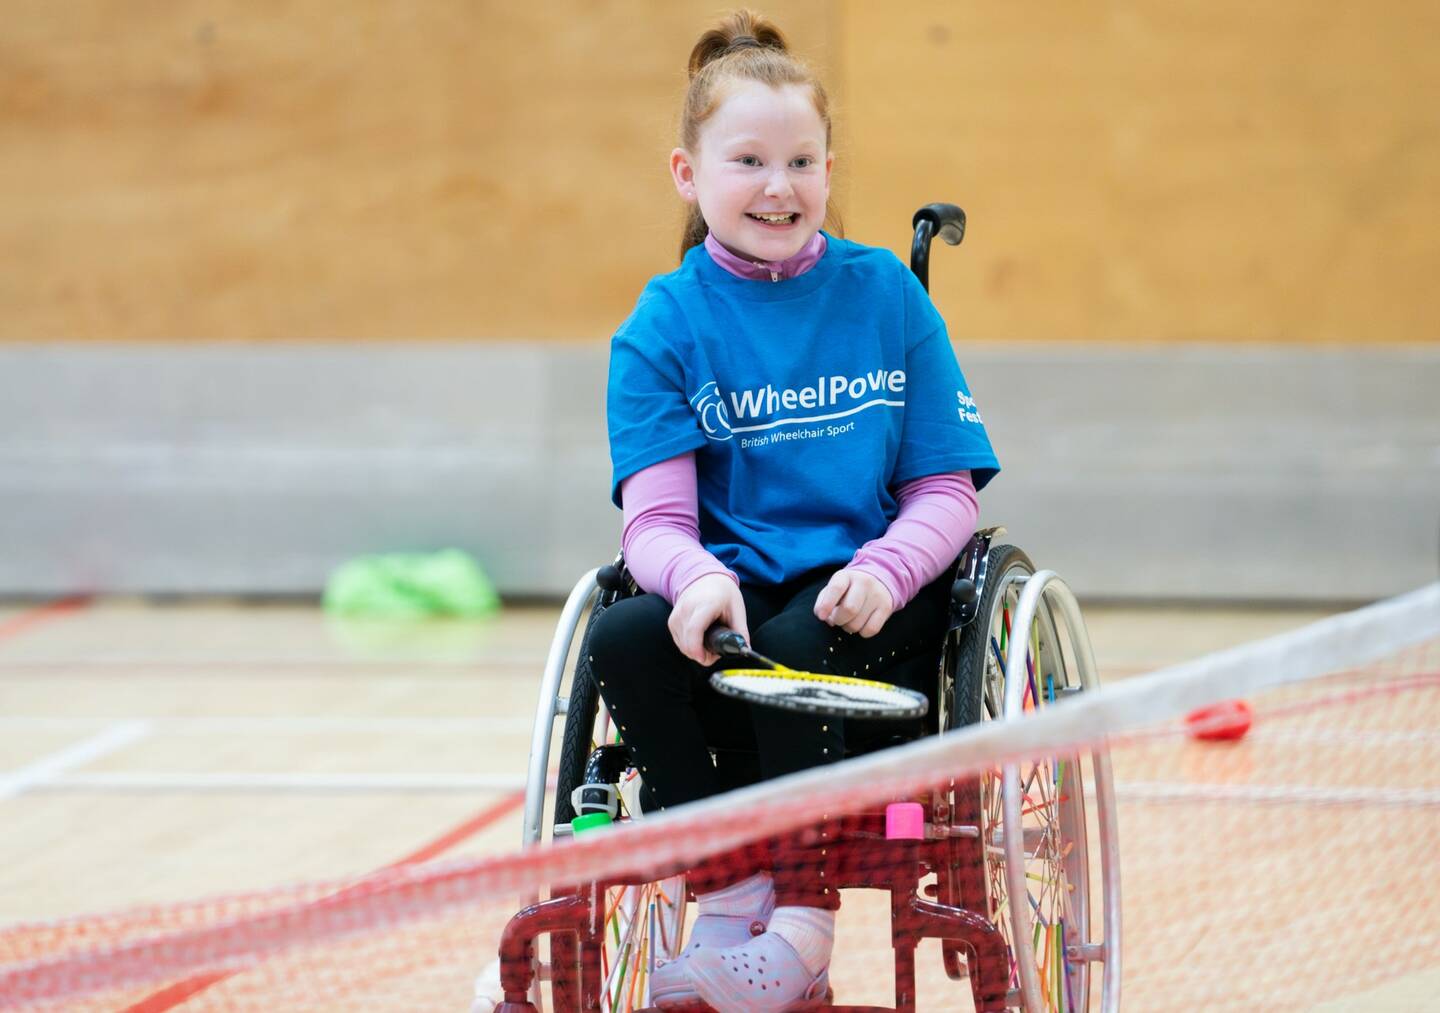 A young girl in a wheelchair is enjoying taking part in a game of badminton in a sports hall. She is wearing a blue 'Wheelpower' t-shirt.